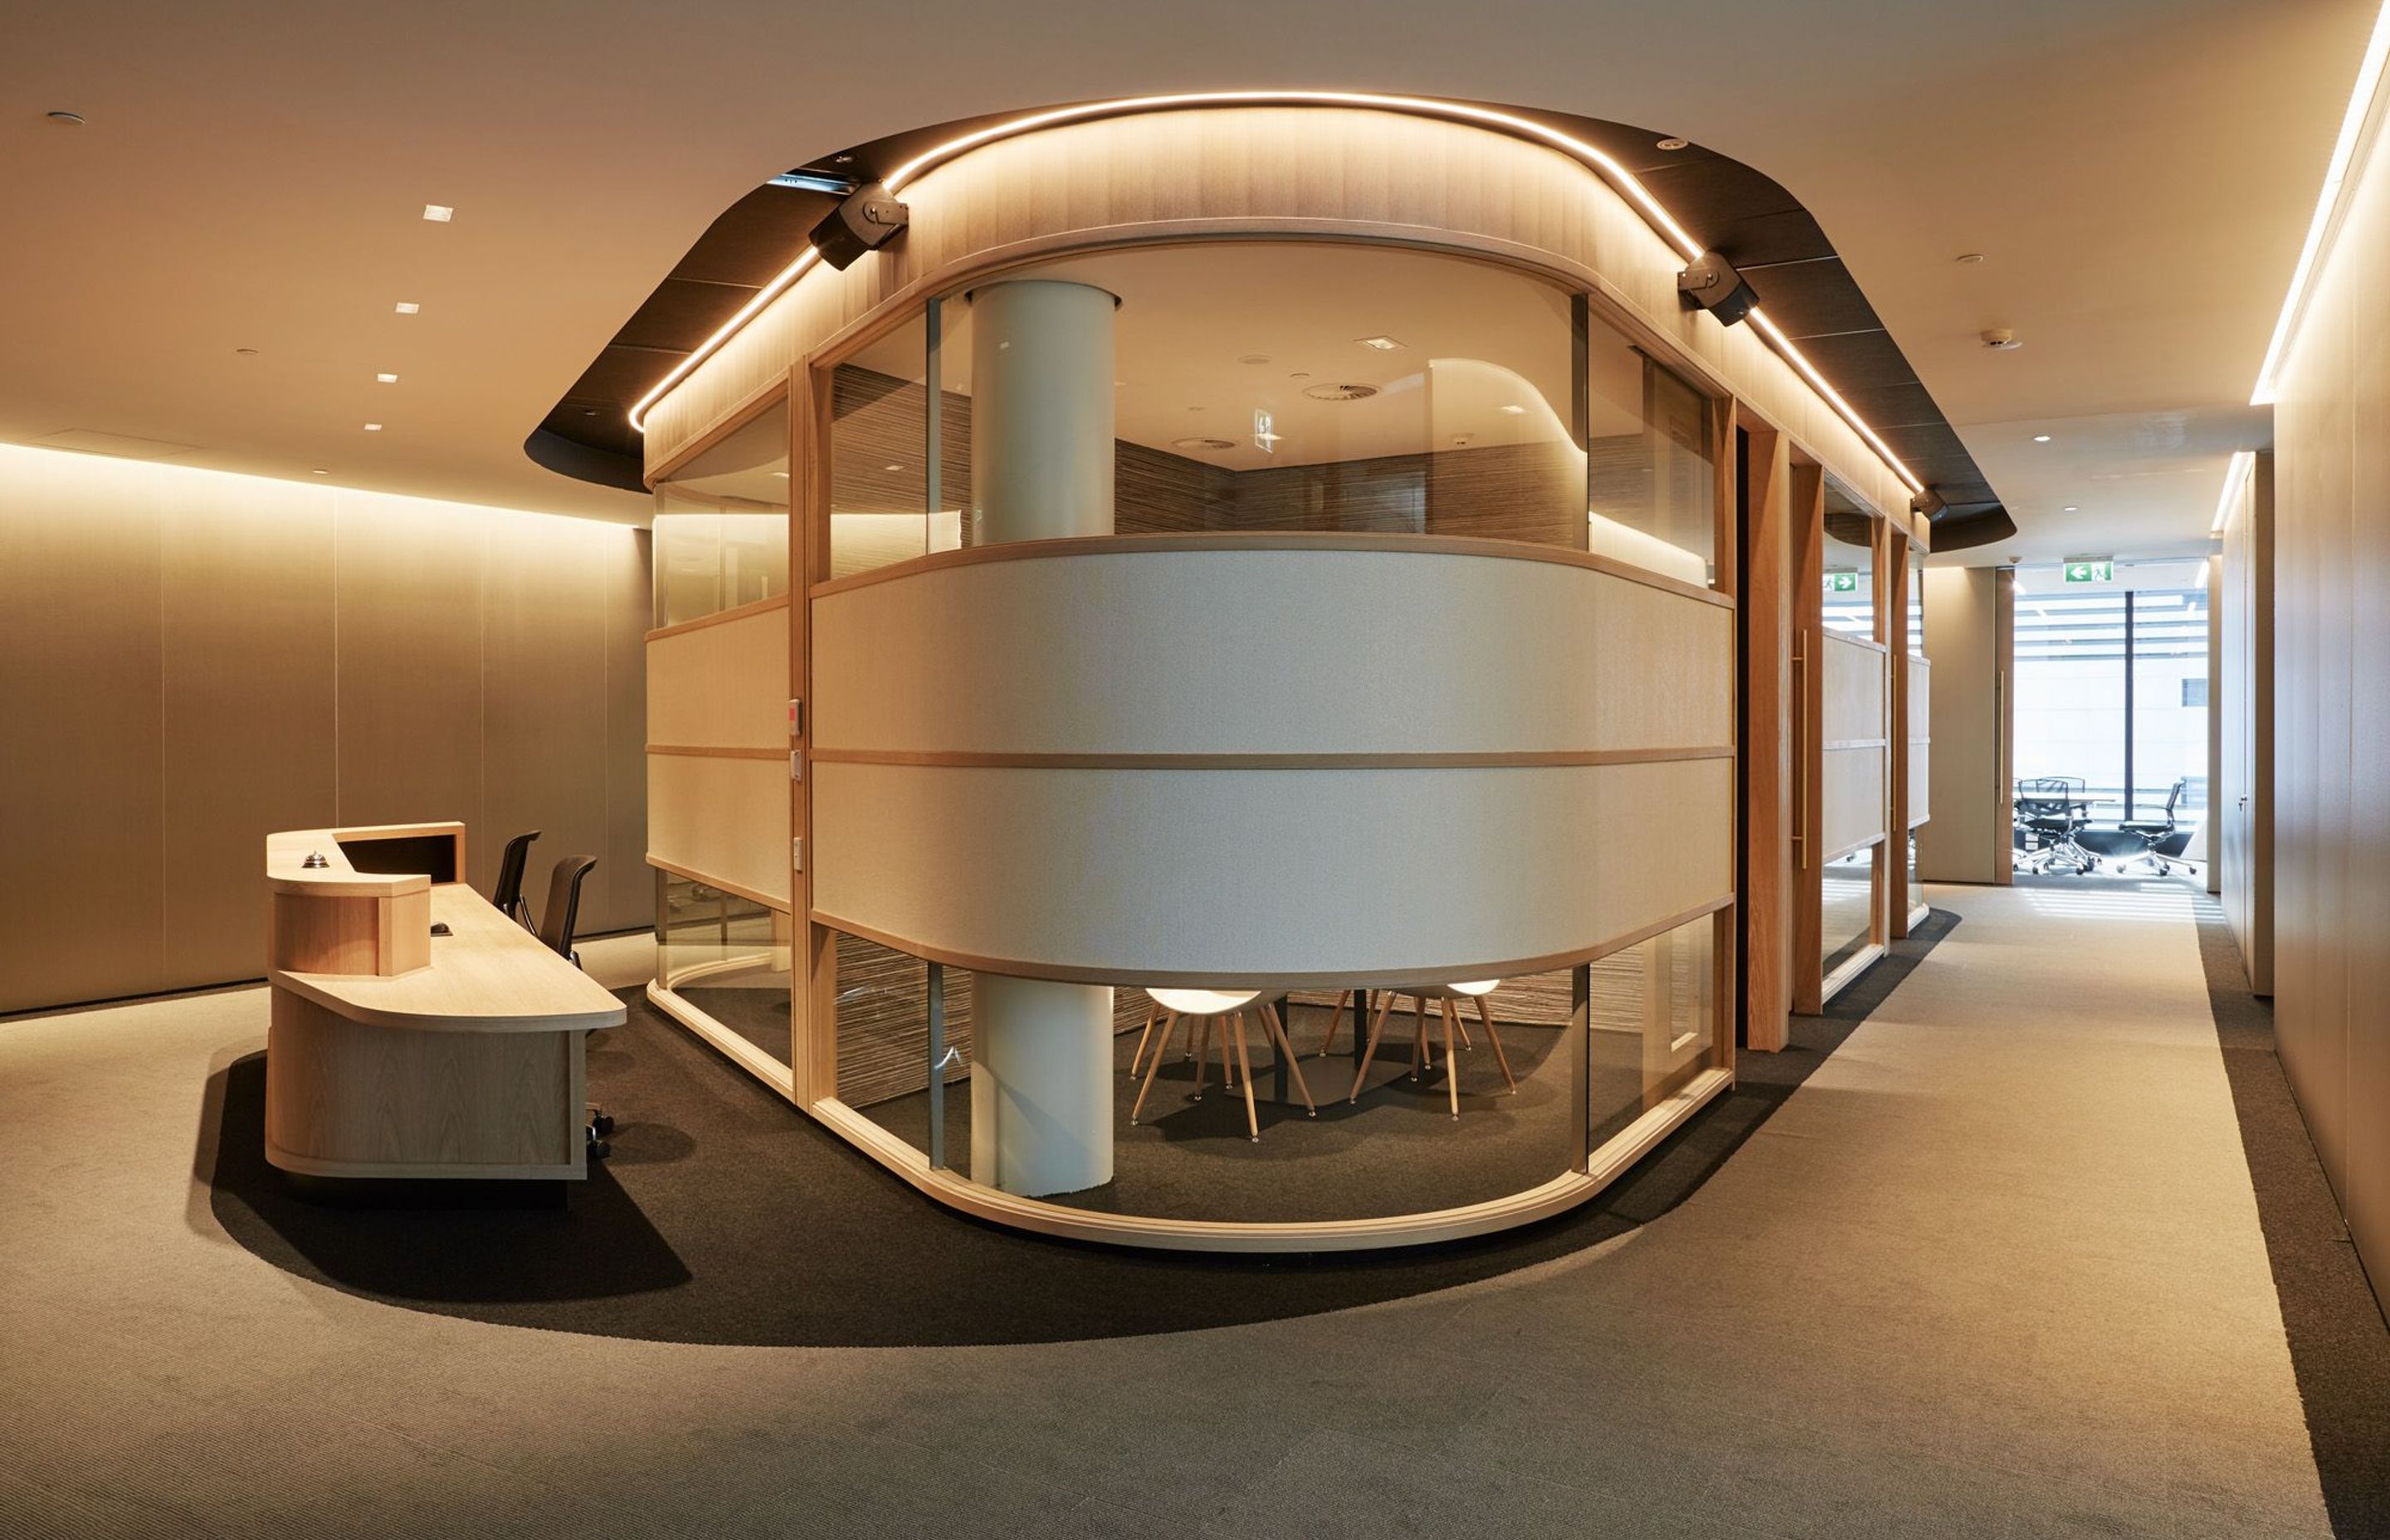 Deloitte's reception area on the 12th floor features a curvaceous internal pod that wraps around small meetings rooms,